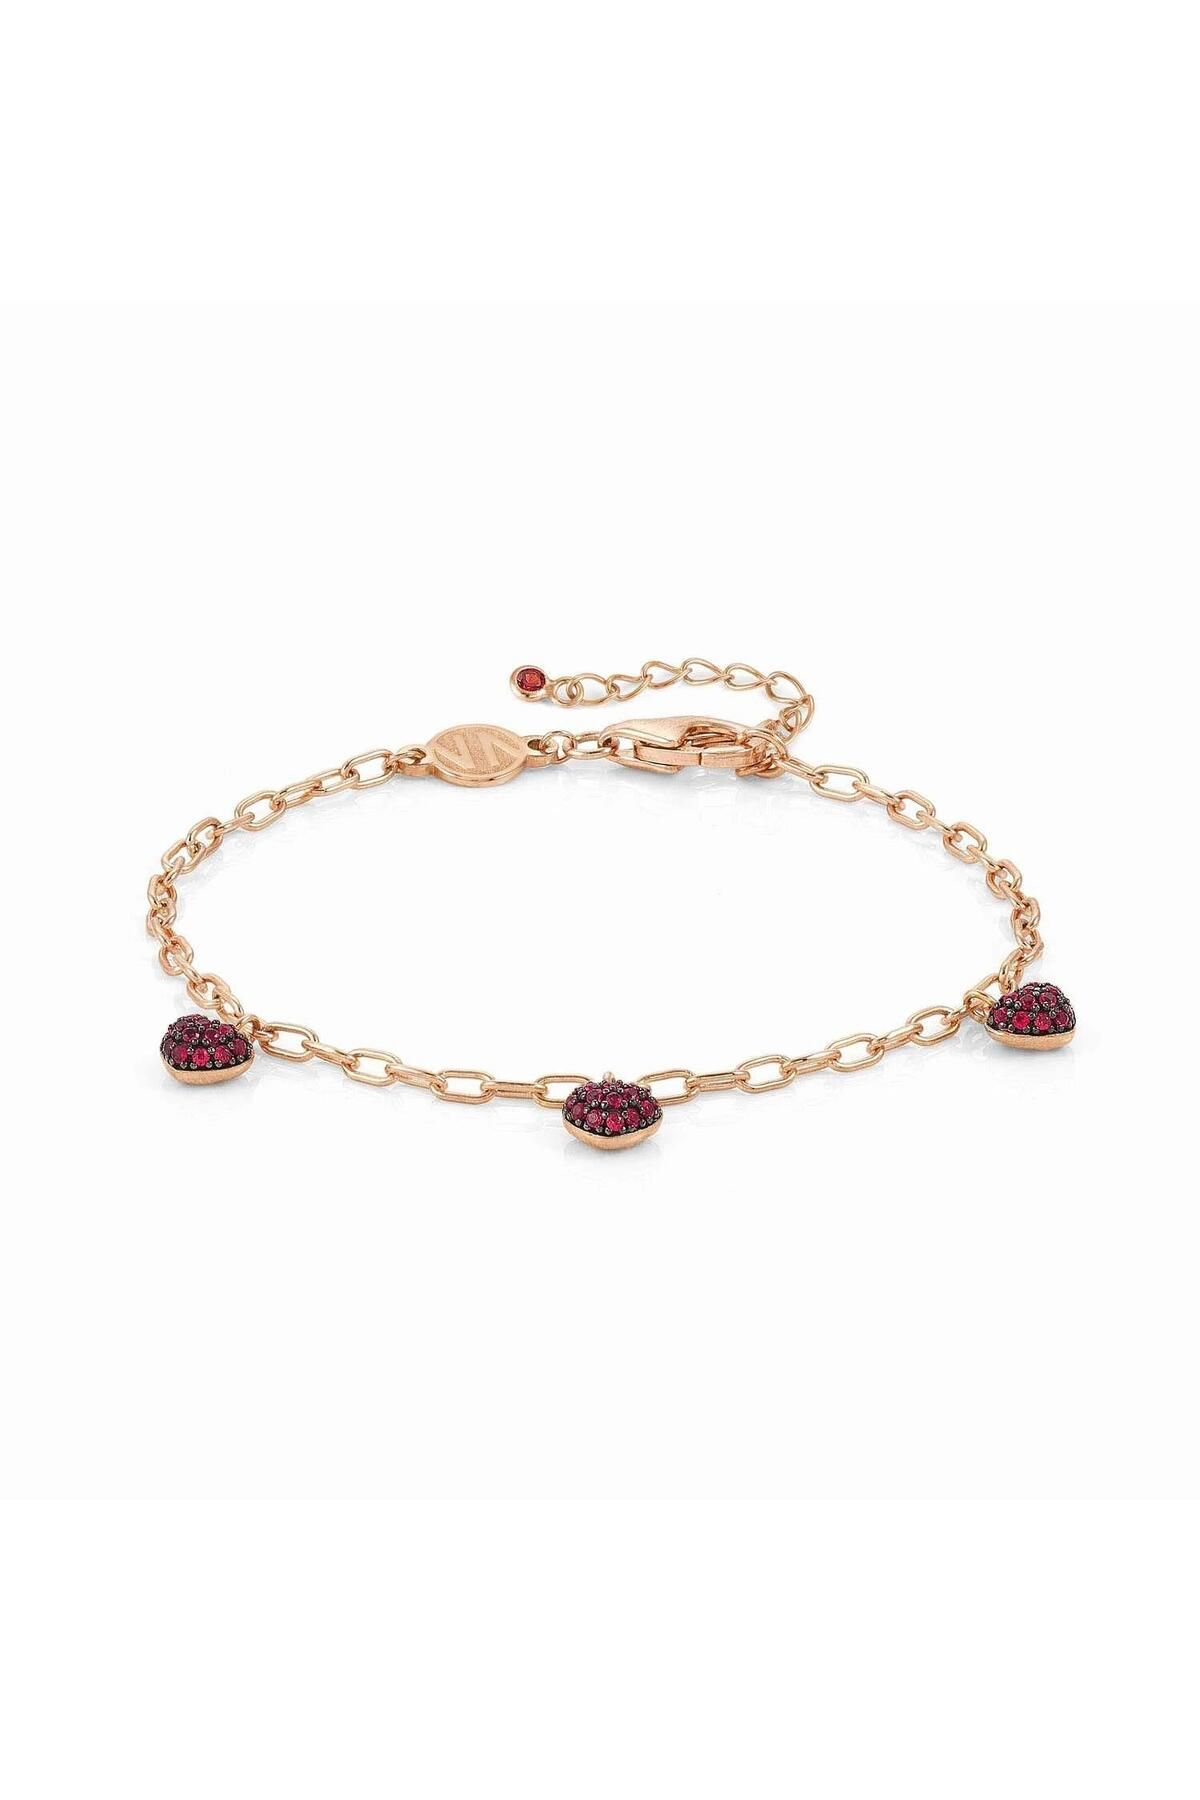 NOMİNATİON Easychıc Bracelet Ed, Love In 925 Silver And Cubic Zirconia (021_rose Gold Red Heart)